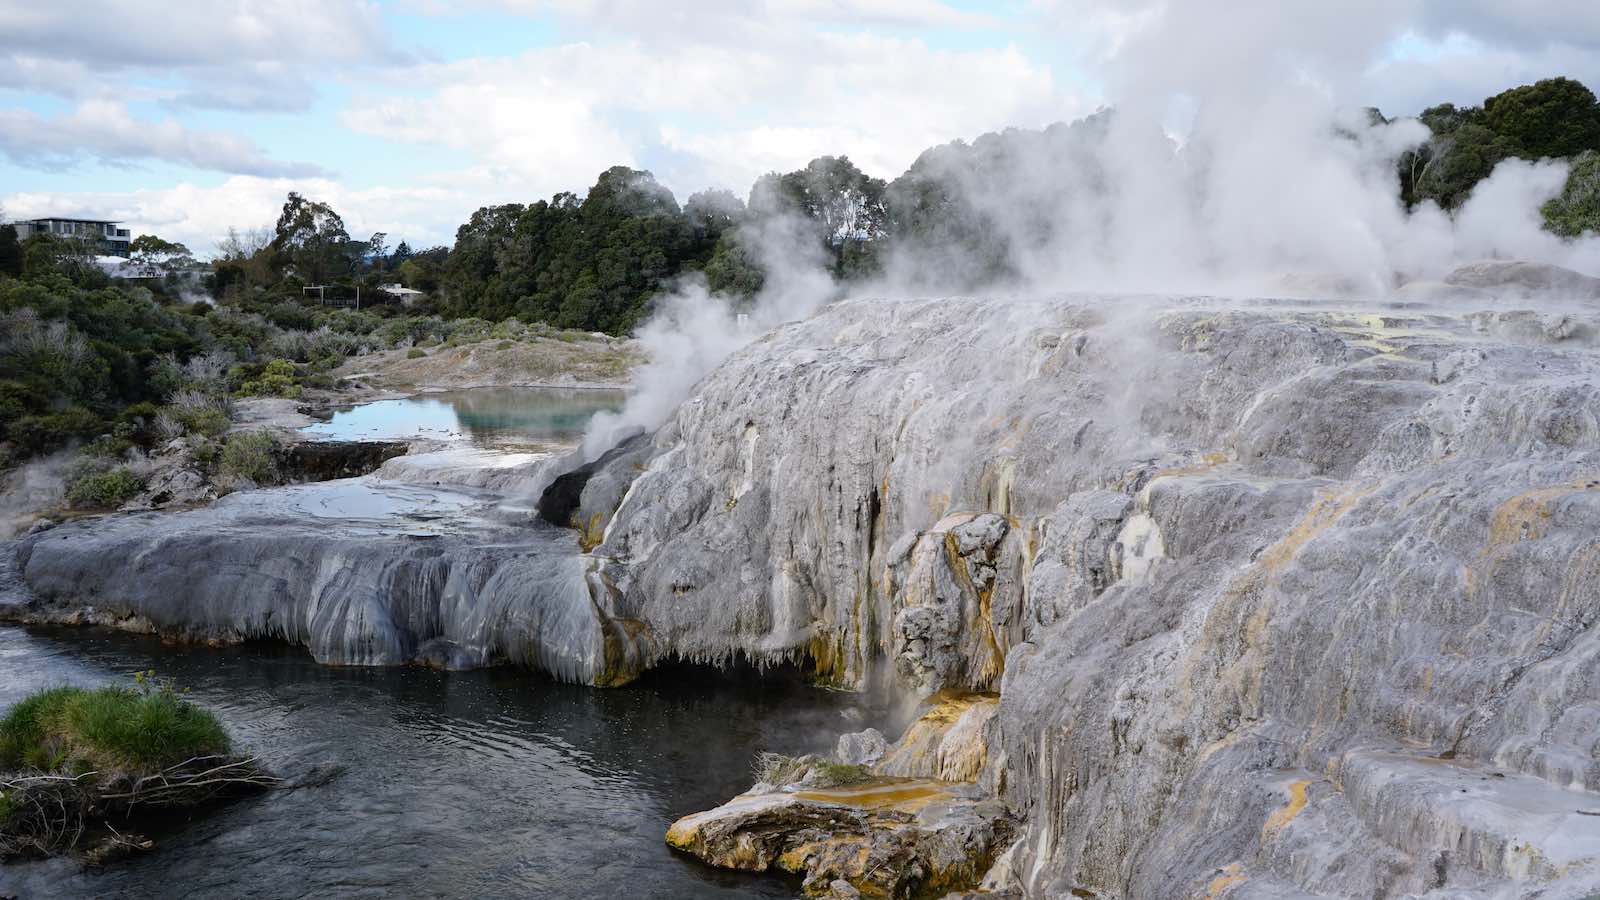 Also some interesting landscapes with gysers and steam spewing out of rock features